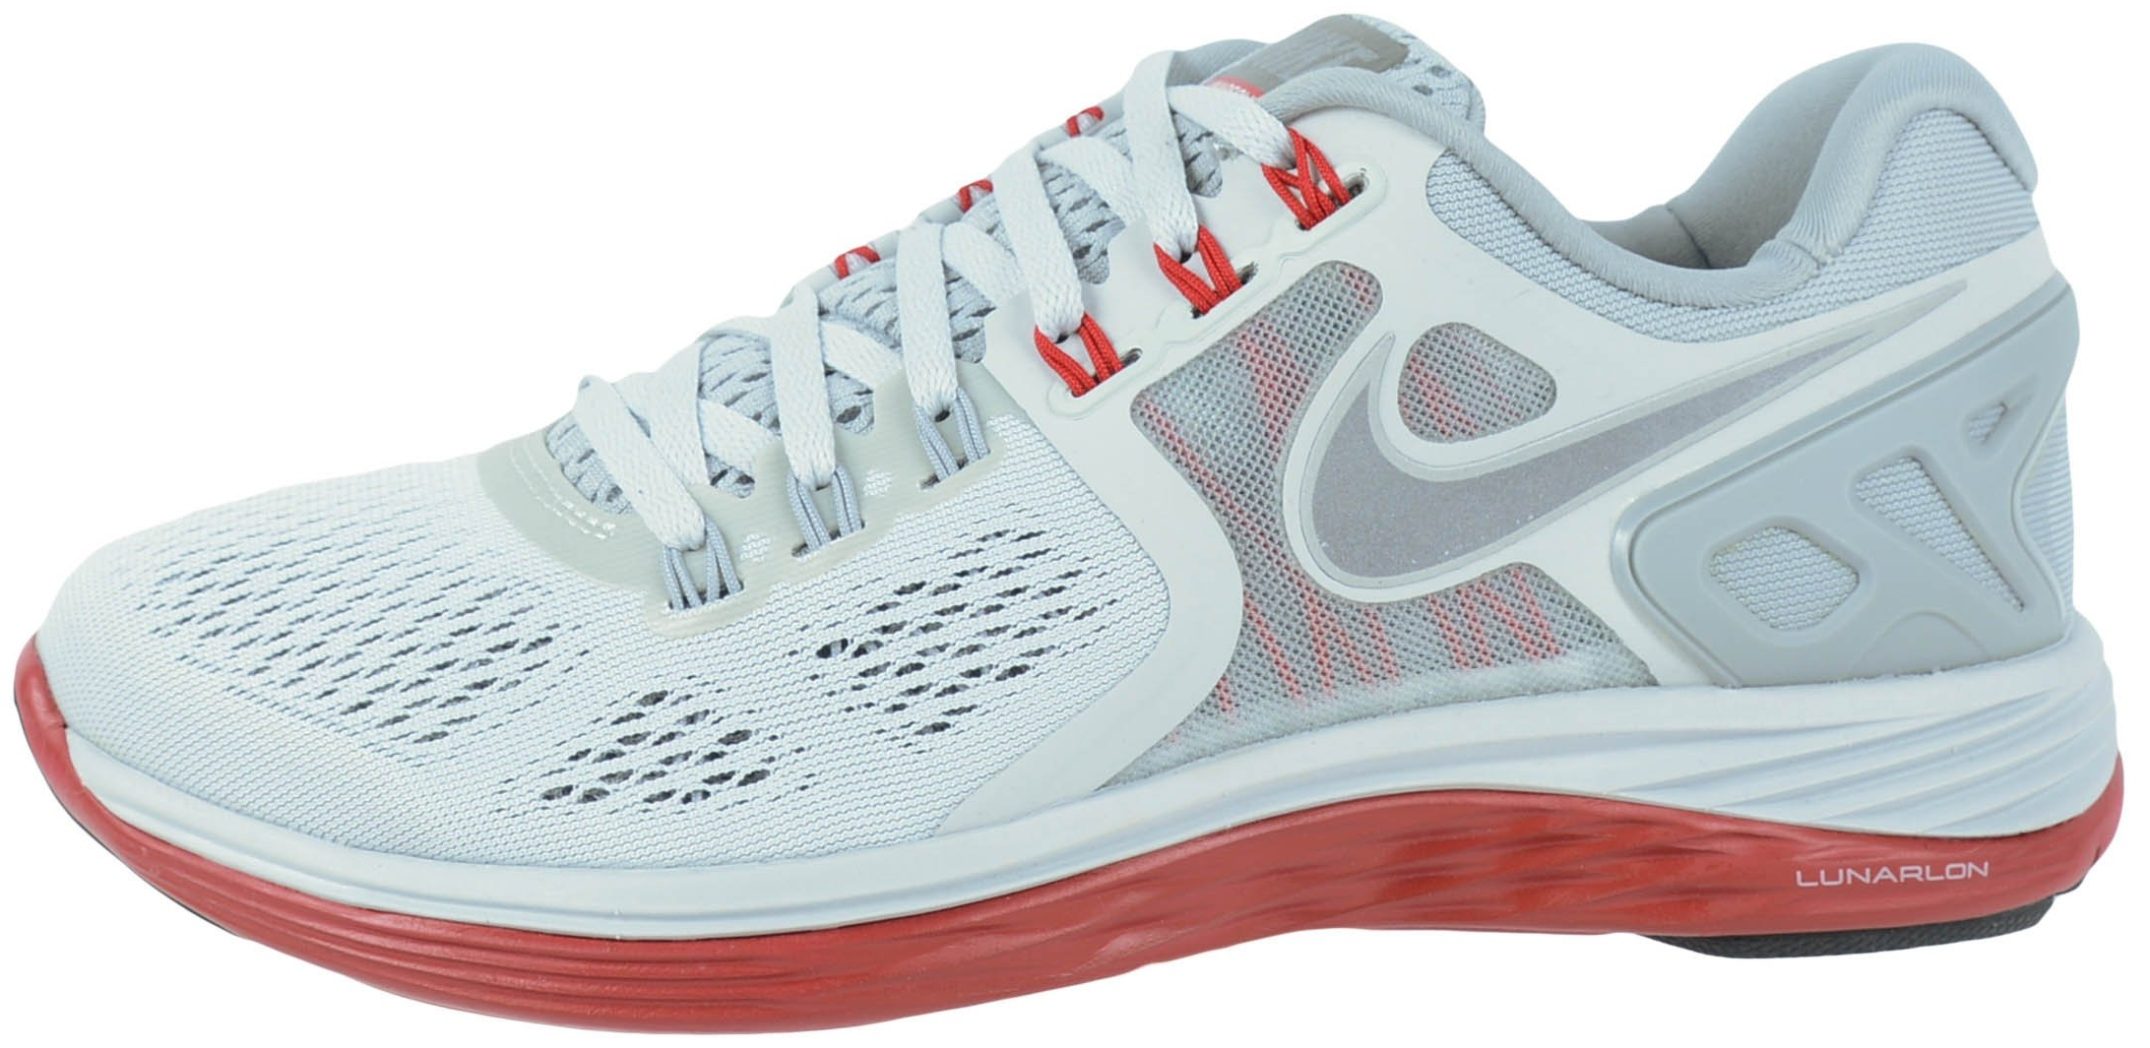 Only $90 + Review of Nike LunarEclipse 4 | RunRepeat